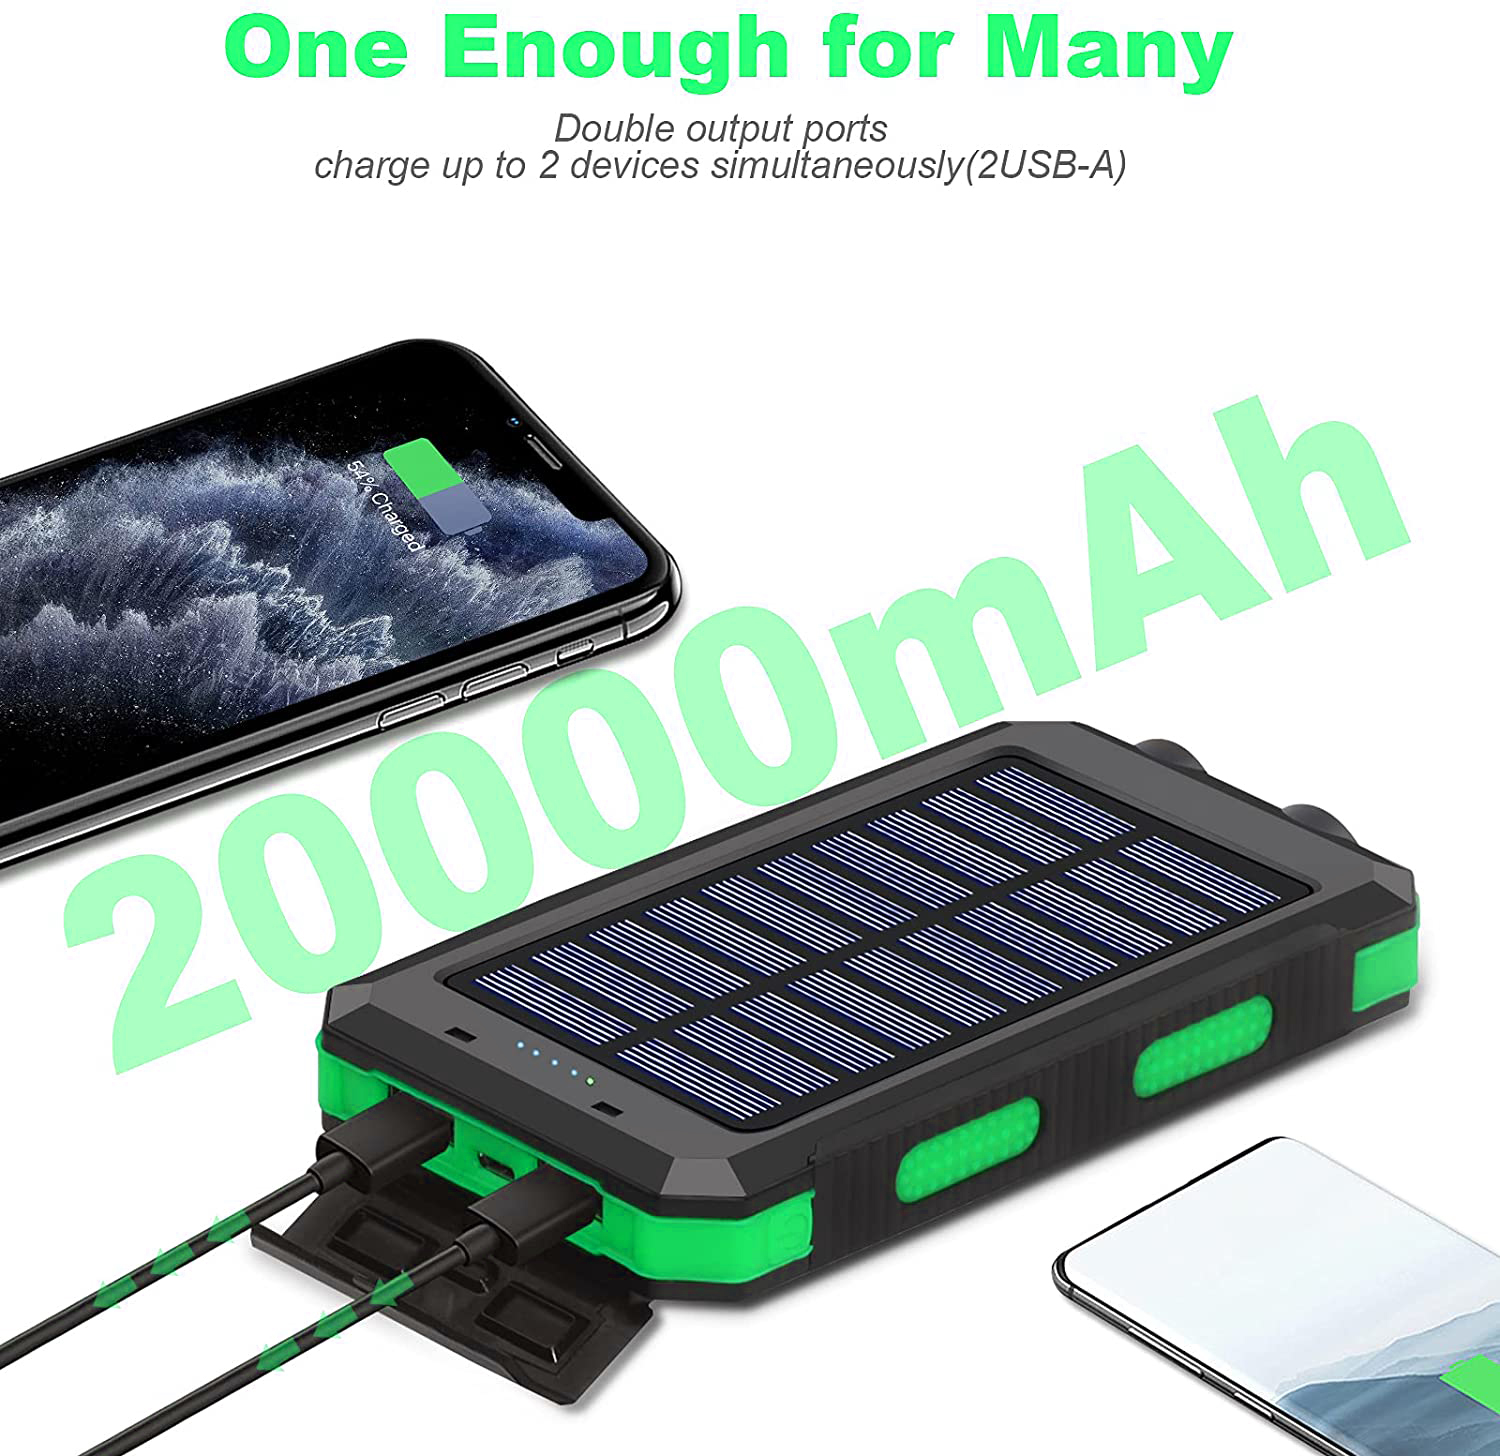 20000mAh Solar Charger for Cell Phone iphone, Portable Solar Power Bank with Dual 5V USB Ports, 2 Led Light Flashlight, Compass Battery Pack for Outdoor Camping Hiking(Green) - image 3 of 7